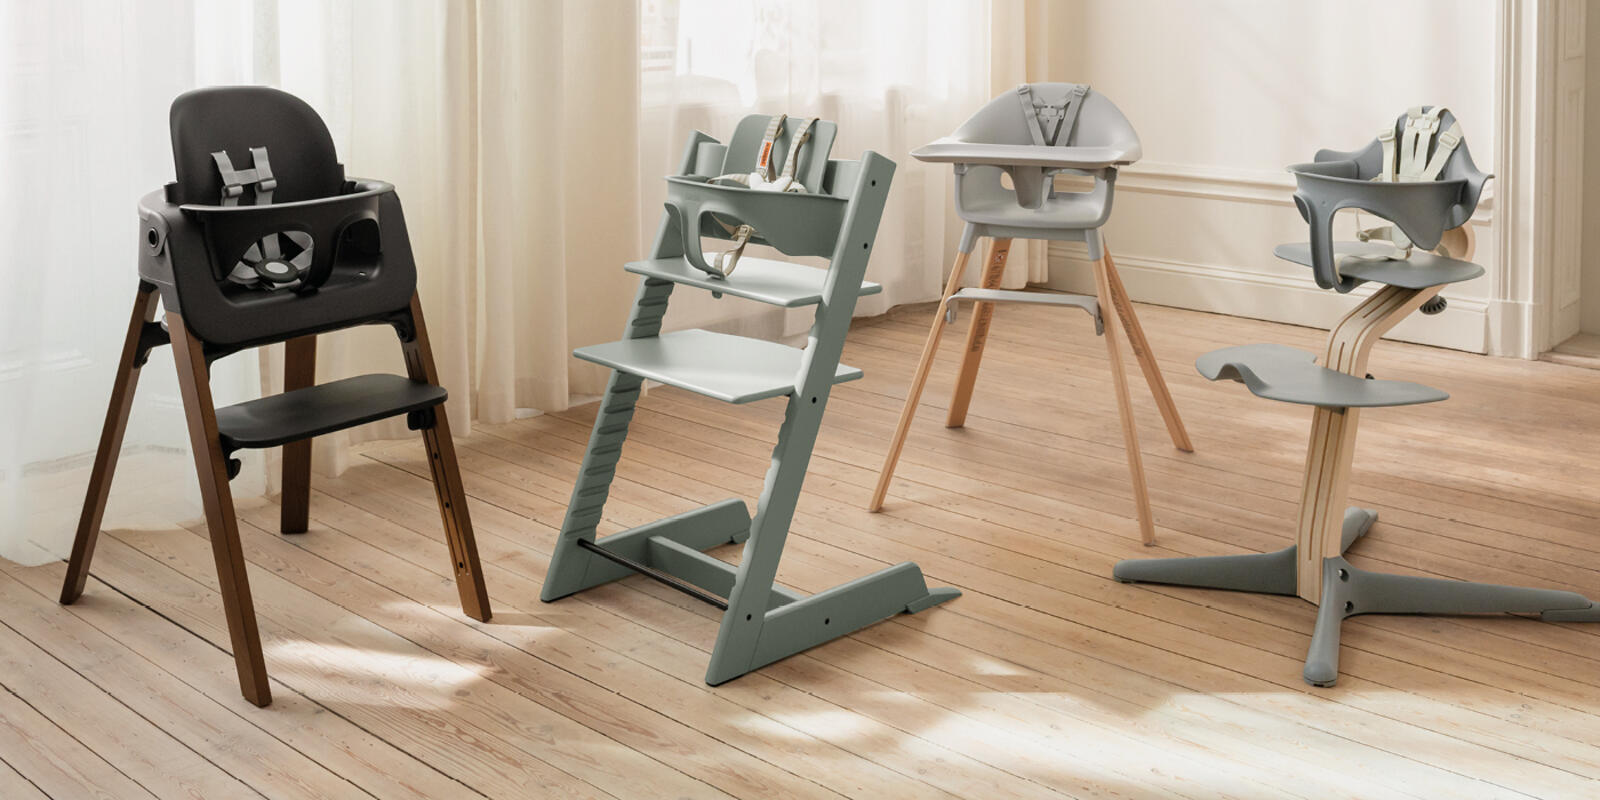 Baby Highchairs & Accessories   From Birth to Adult   Stokke®